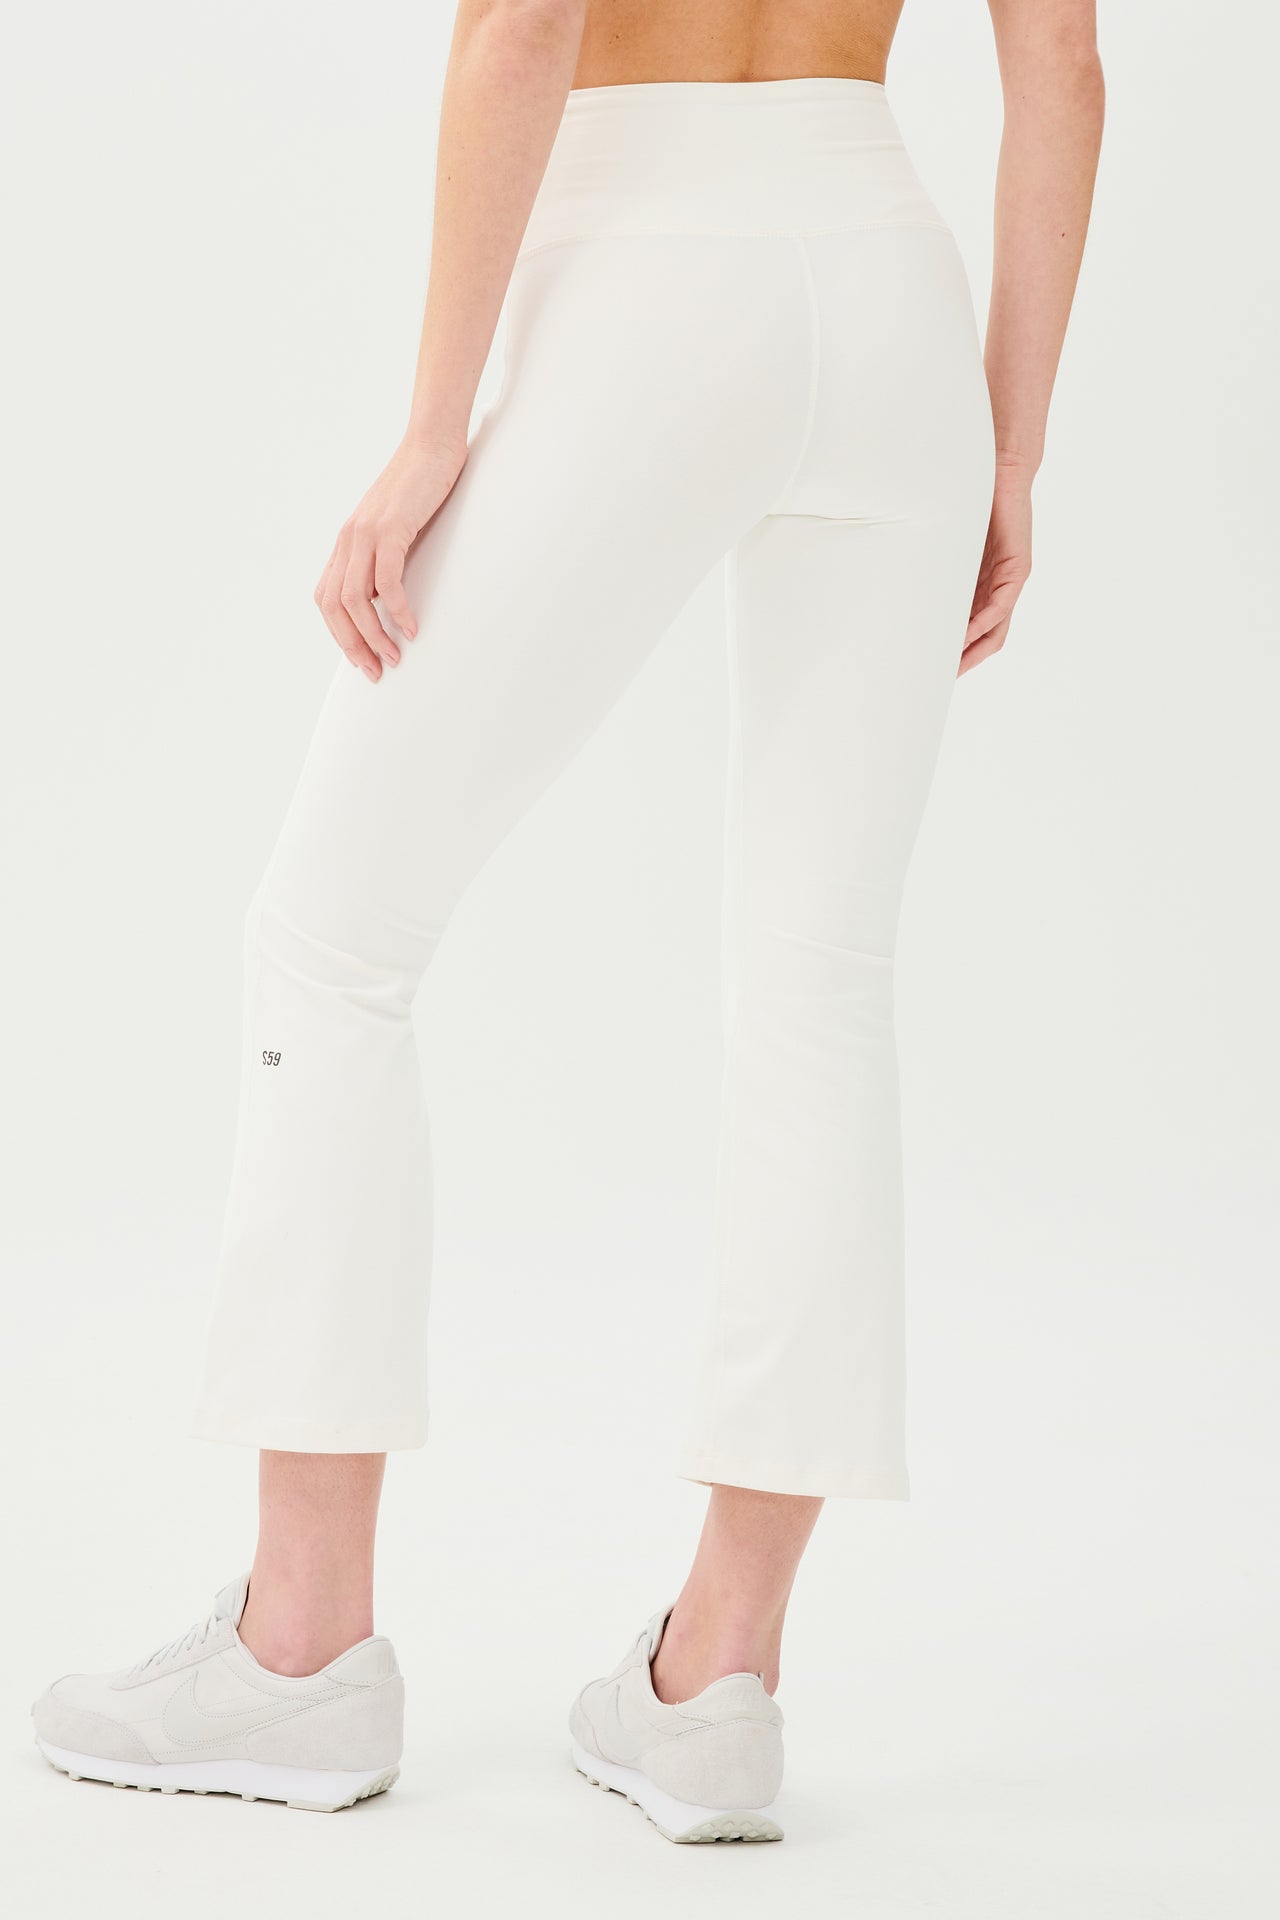 The back view of a woman wearing SPLITS59 Raquel High Waist Crop - White yoga pants with 4-way stretch.